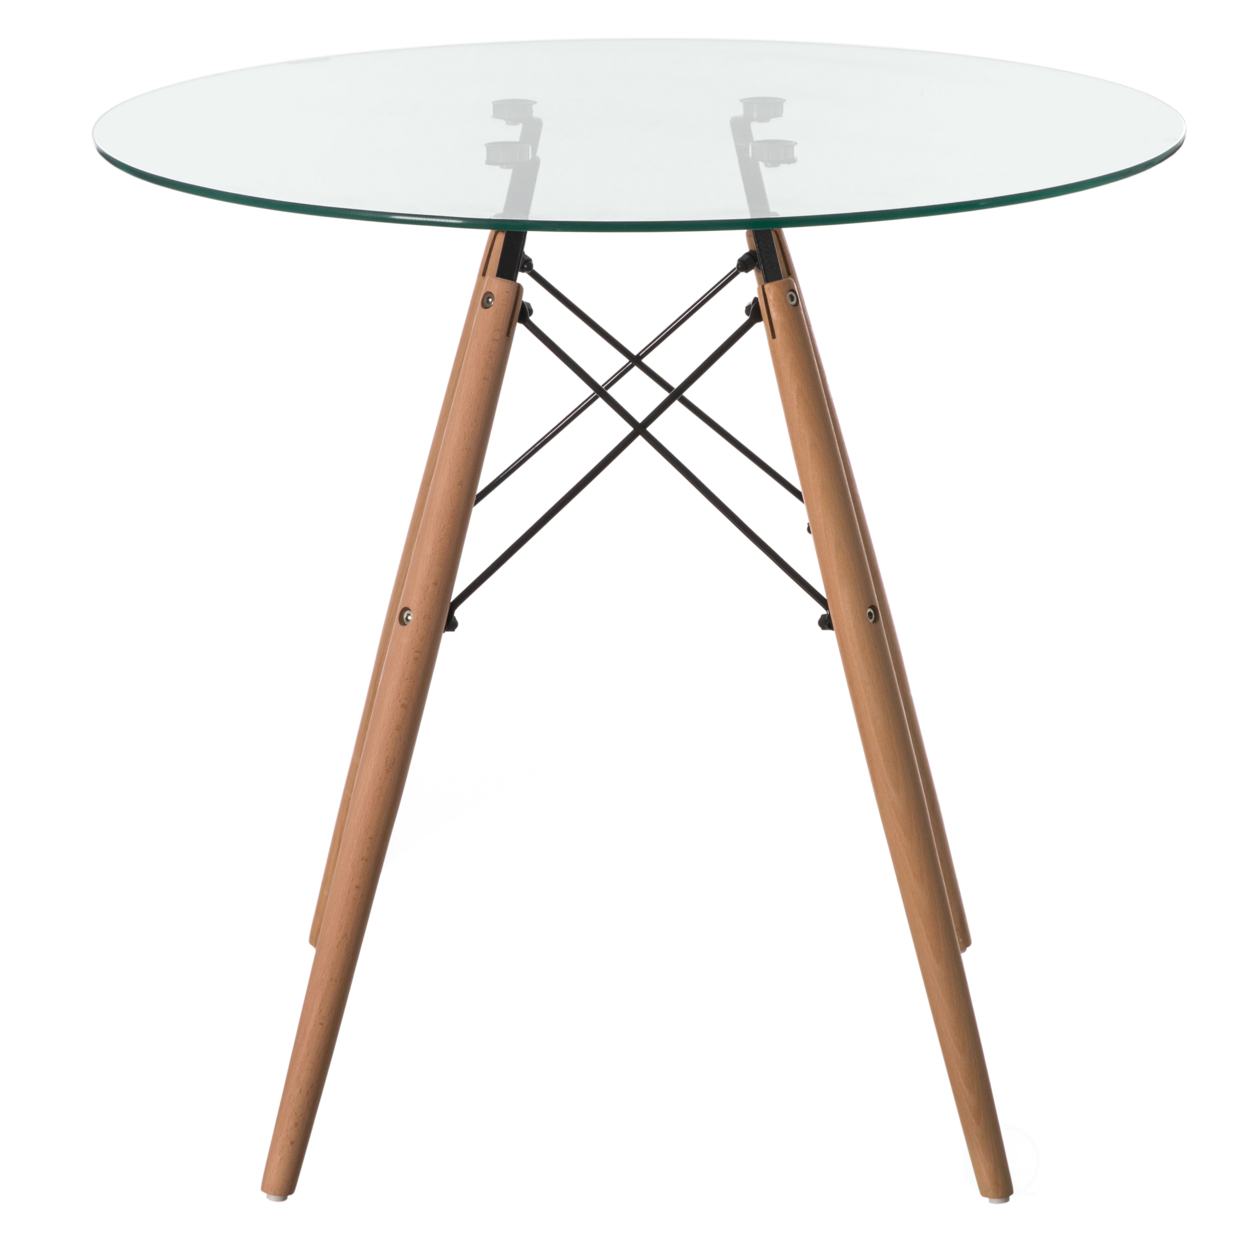 Round Clear Glass Top Accent Dining Table With 4 Beech Solid Wood Legs Modern Space Saving Small Leisure Circle Desk